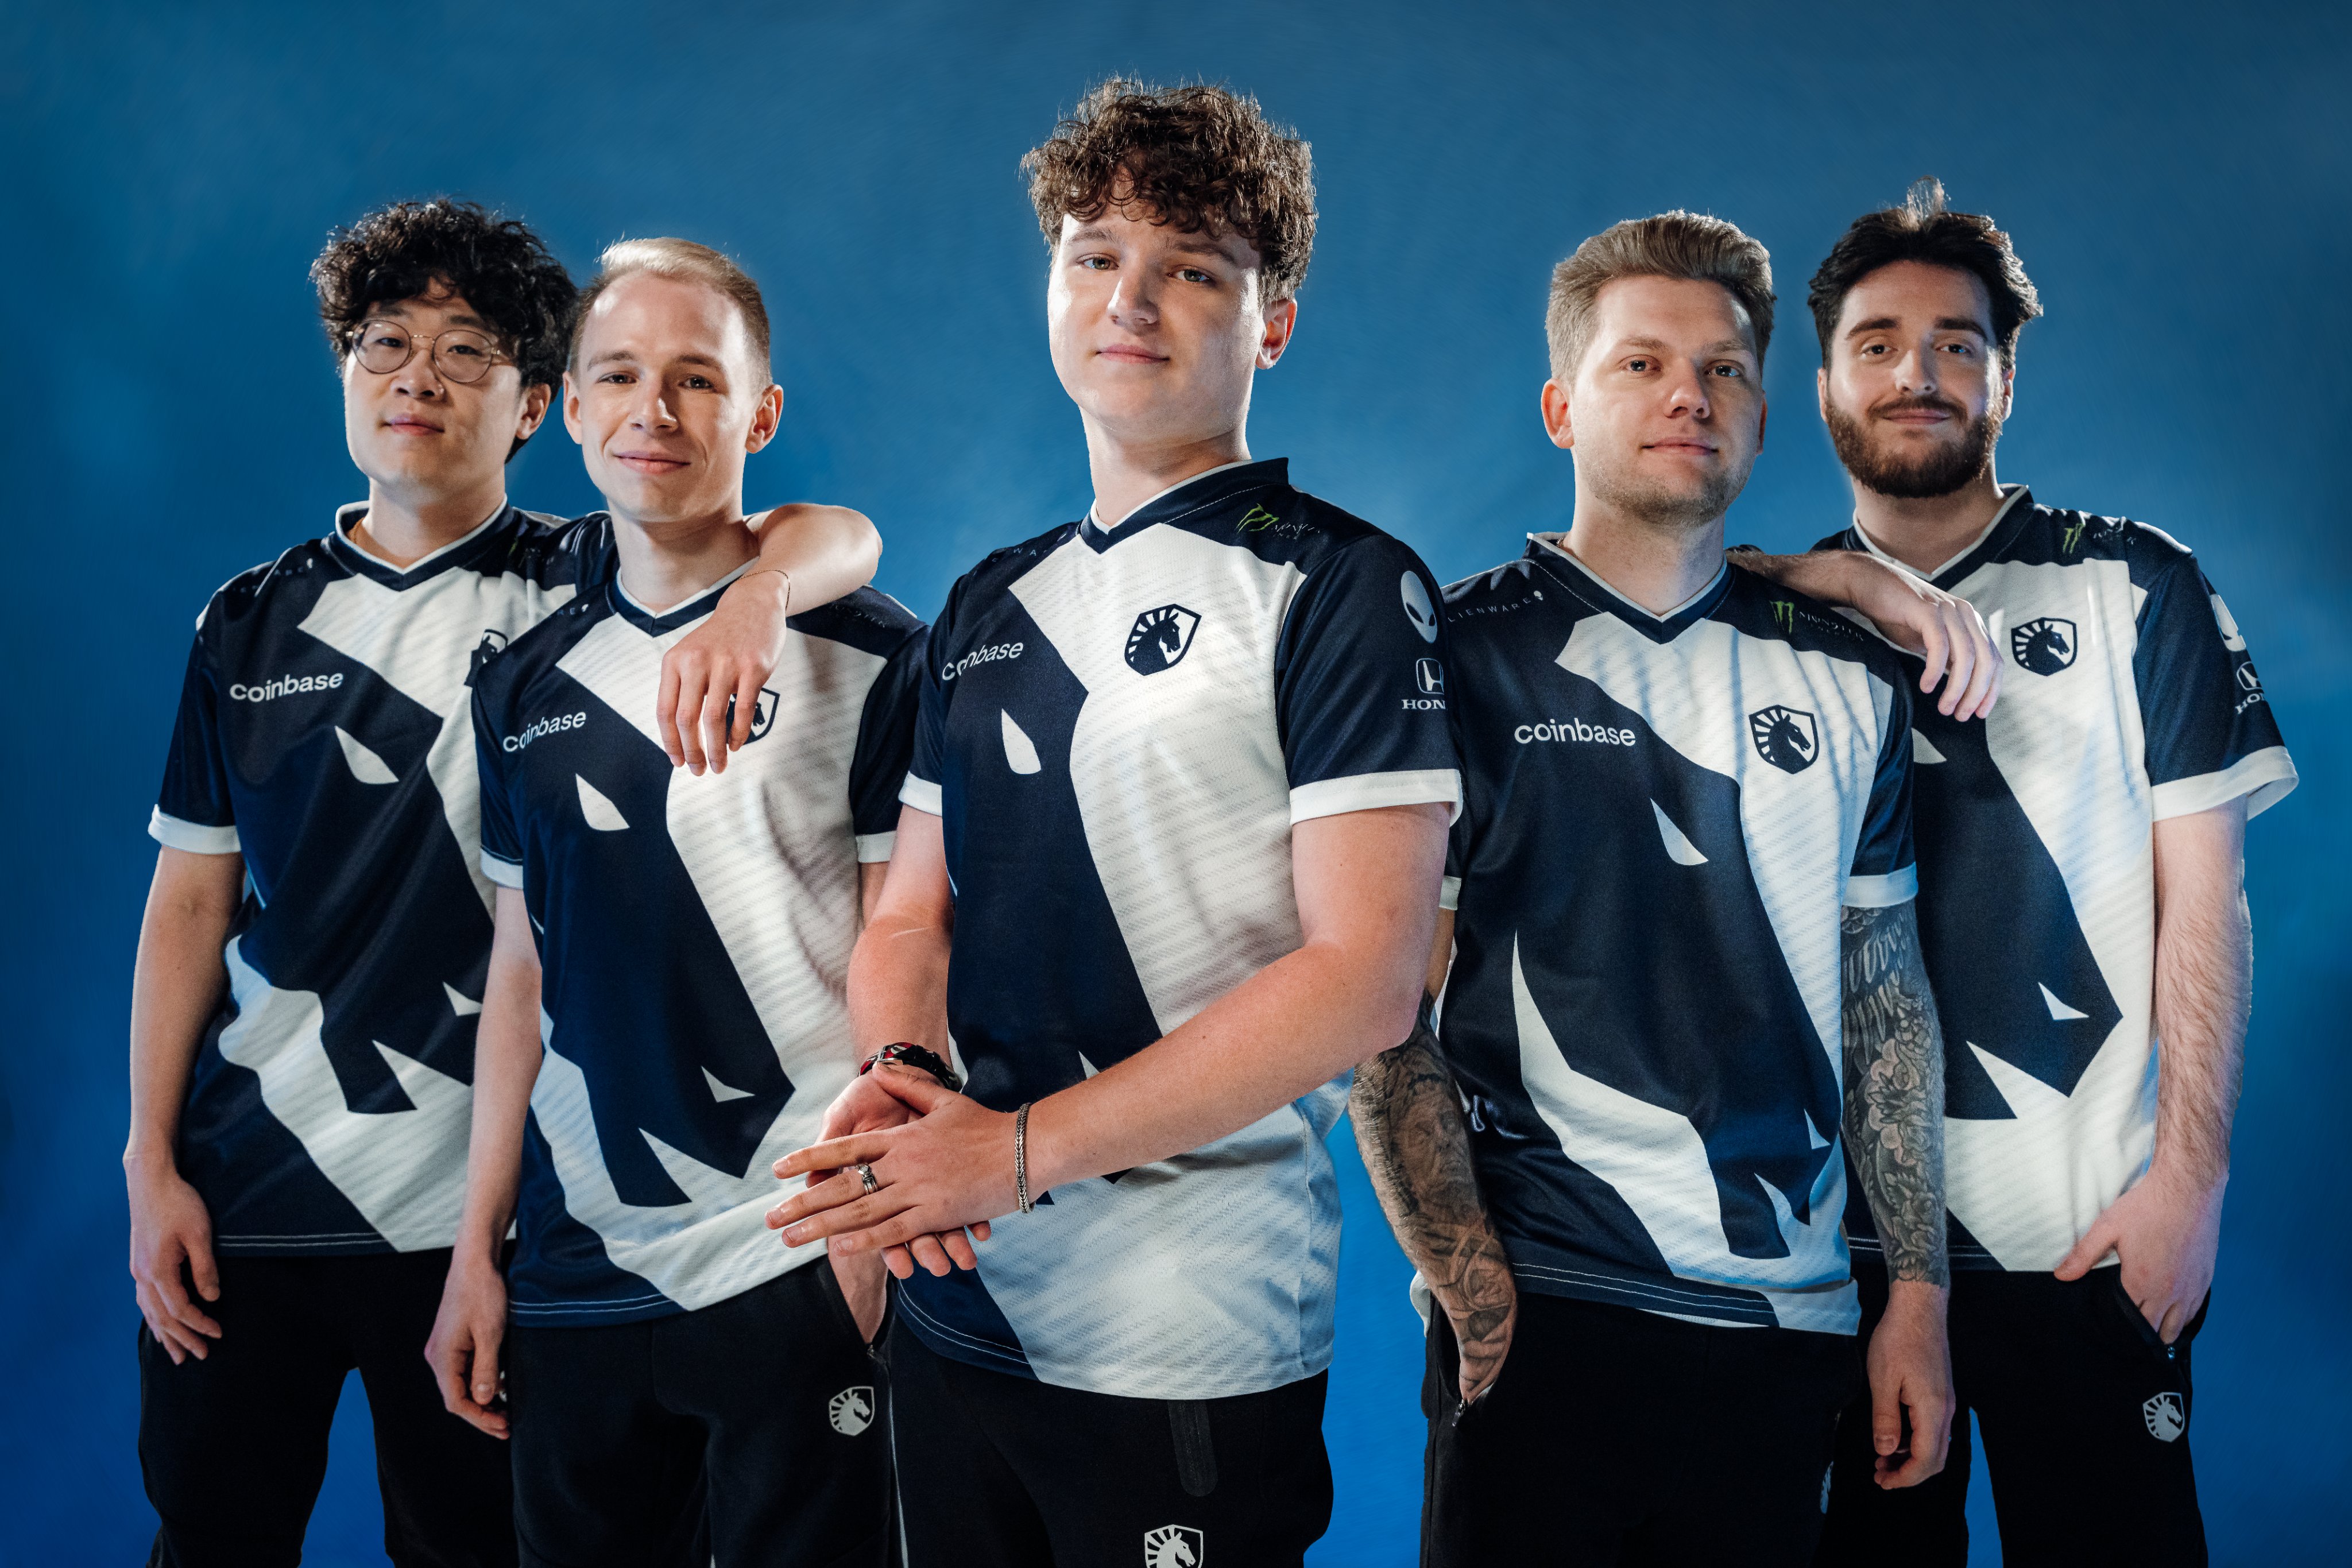 højen lort Bemyndigelse Team Liquid CSGO on X: "Suit up for Victory in the new Team Liquid Official  2023 Jersey 🔥 You saw it onstage in Katowice, now get your own 🏟️  Available NOW: https://t.co/swEmTfsl35